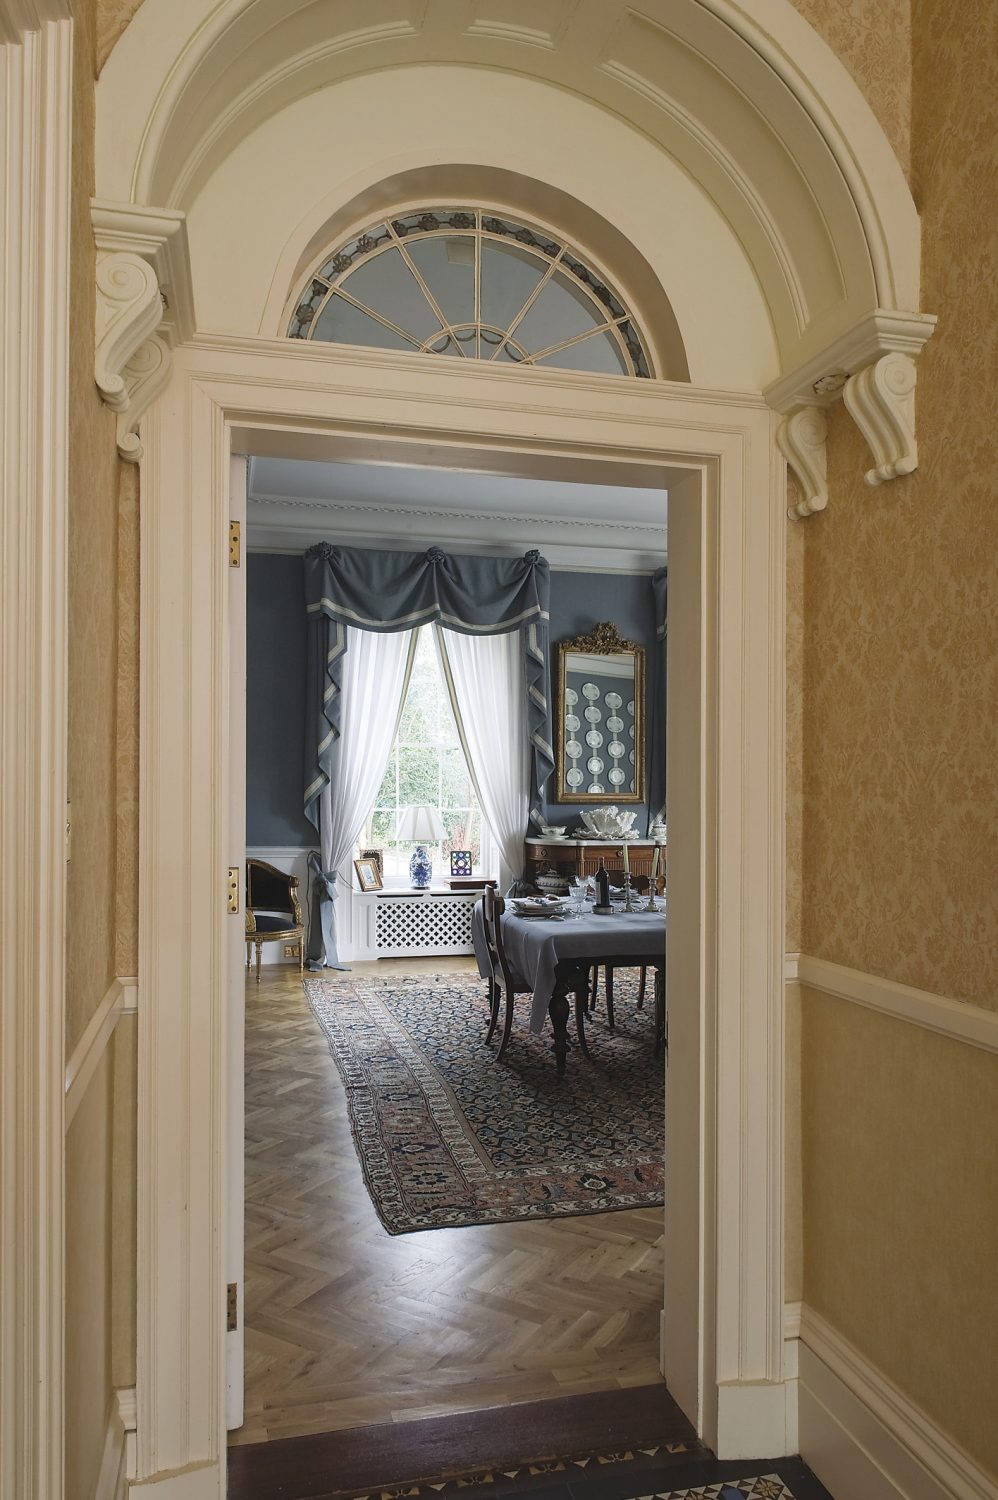 the view into the dining room from the hallway